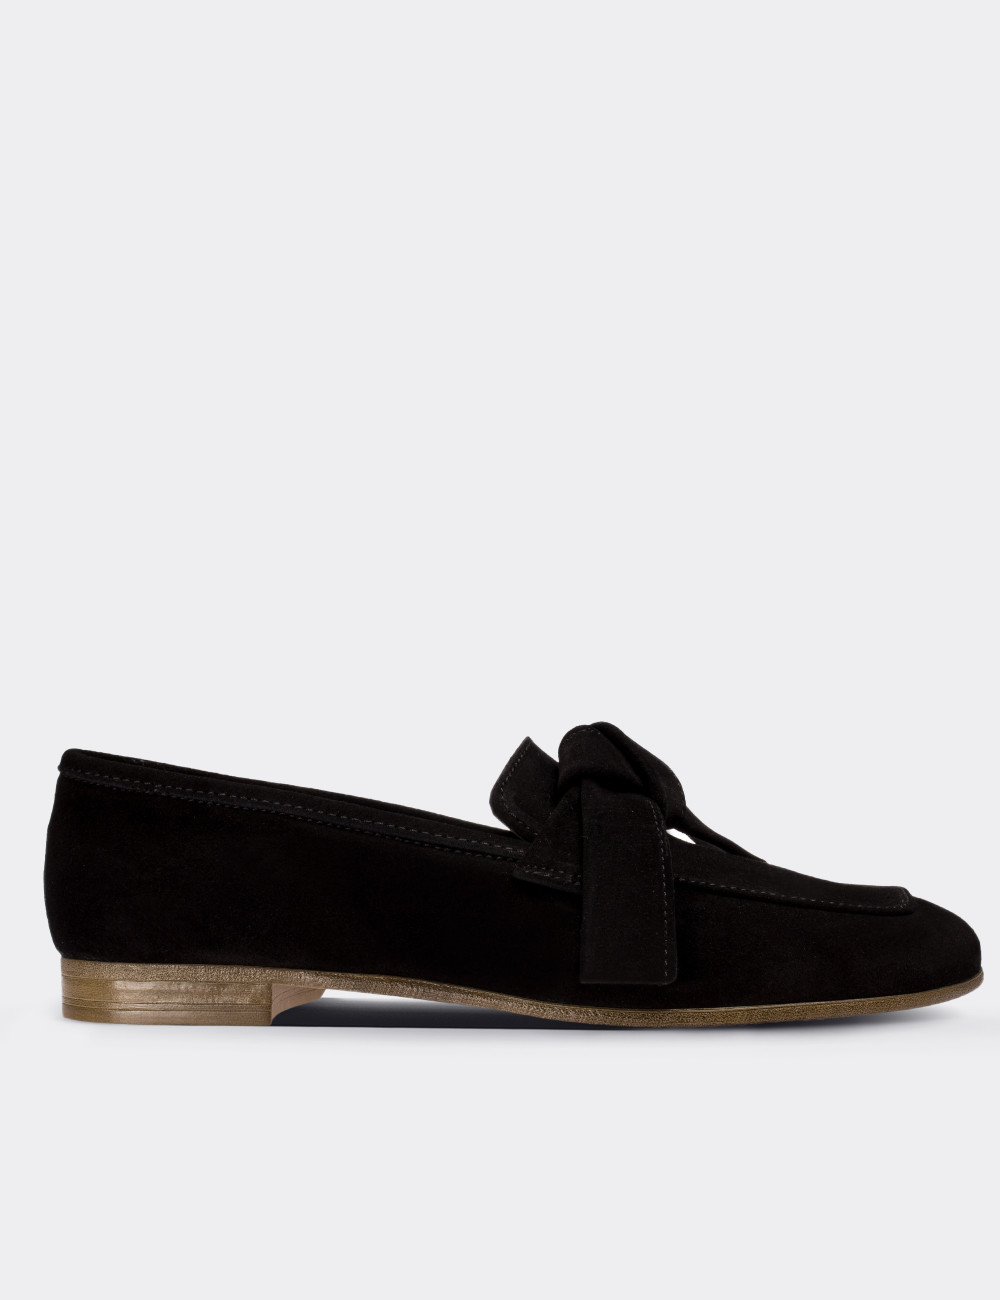 Black Suede Leather Loafers - 01744ZSYHM01